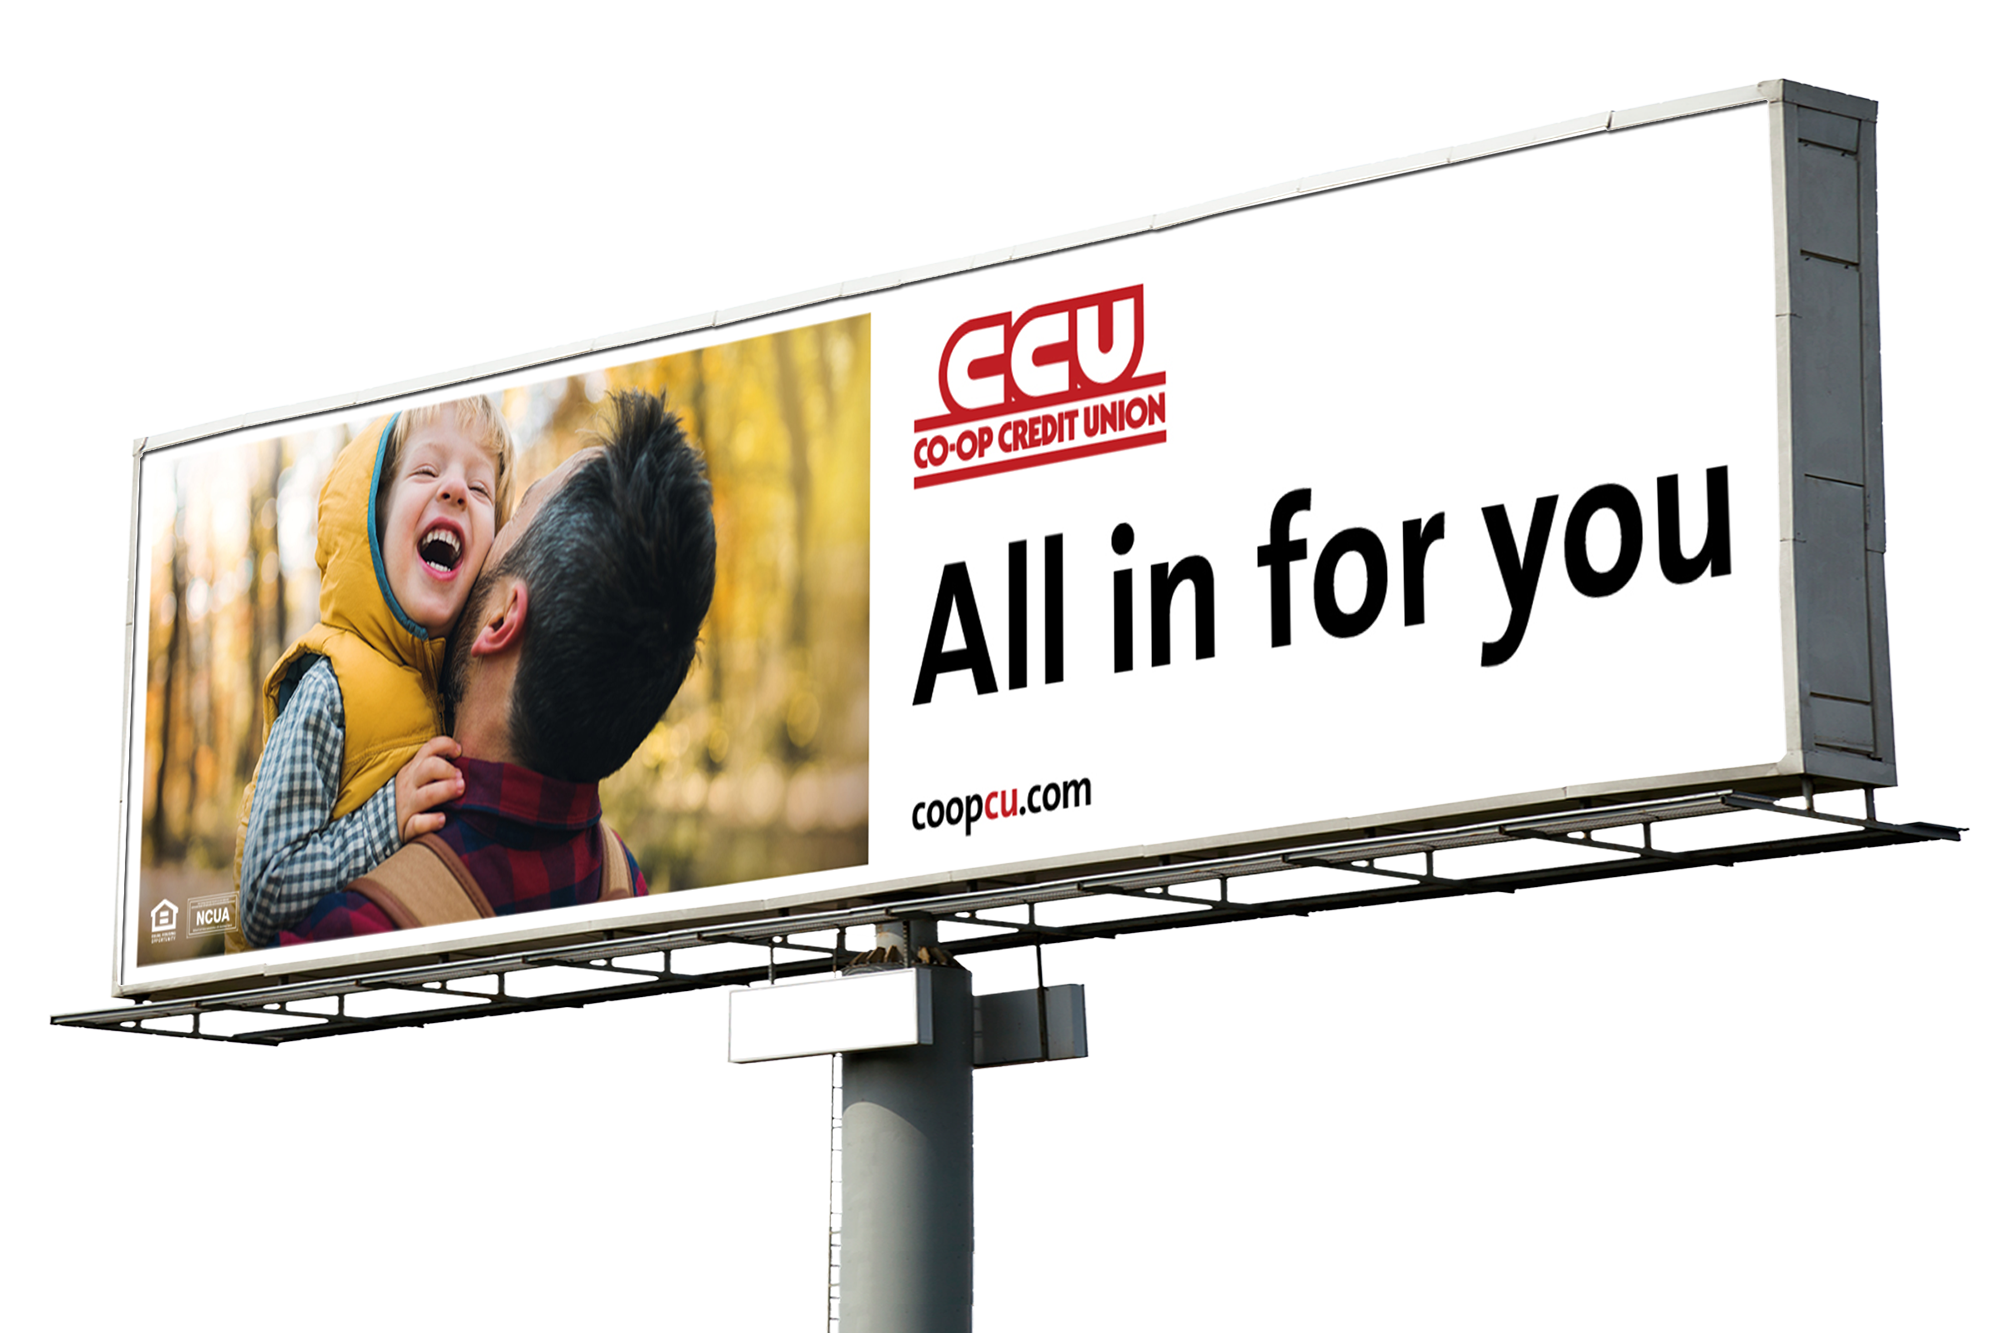 Co-op Credit Union billboard with father-son photo at left, then CCU logo, all in for you headline and co op c u dot com URL